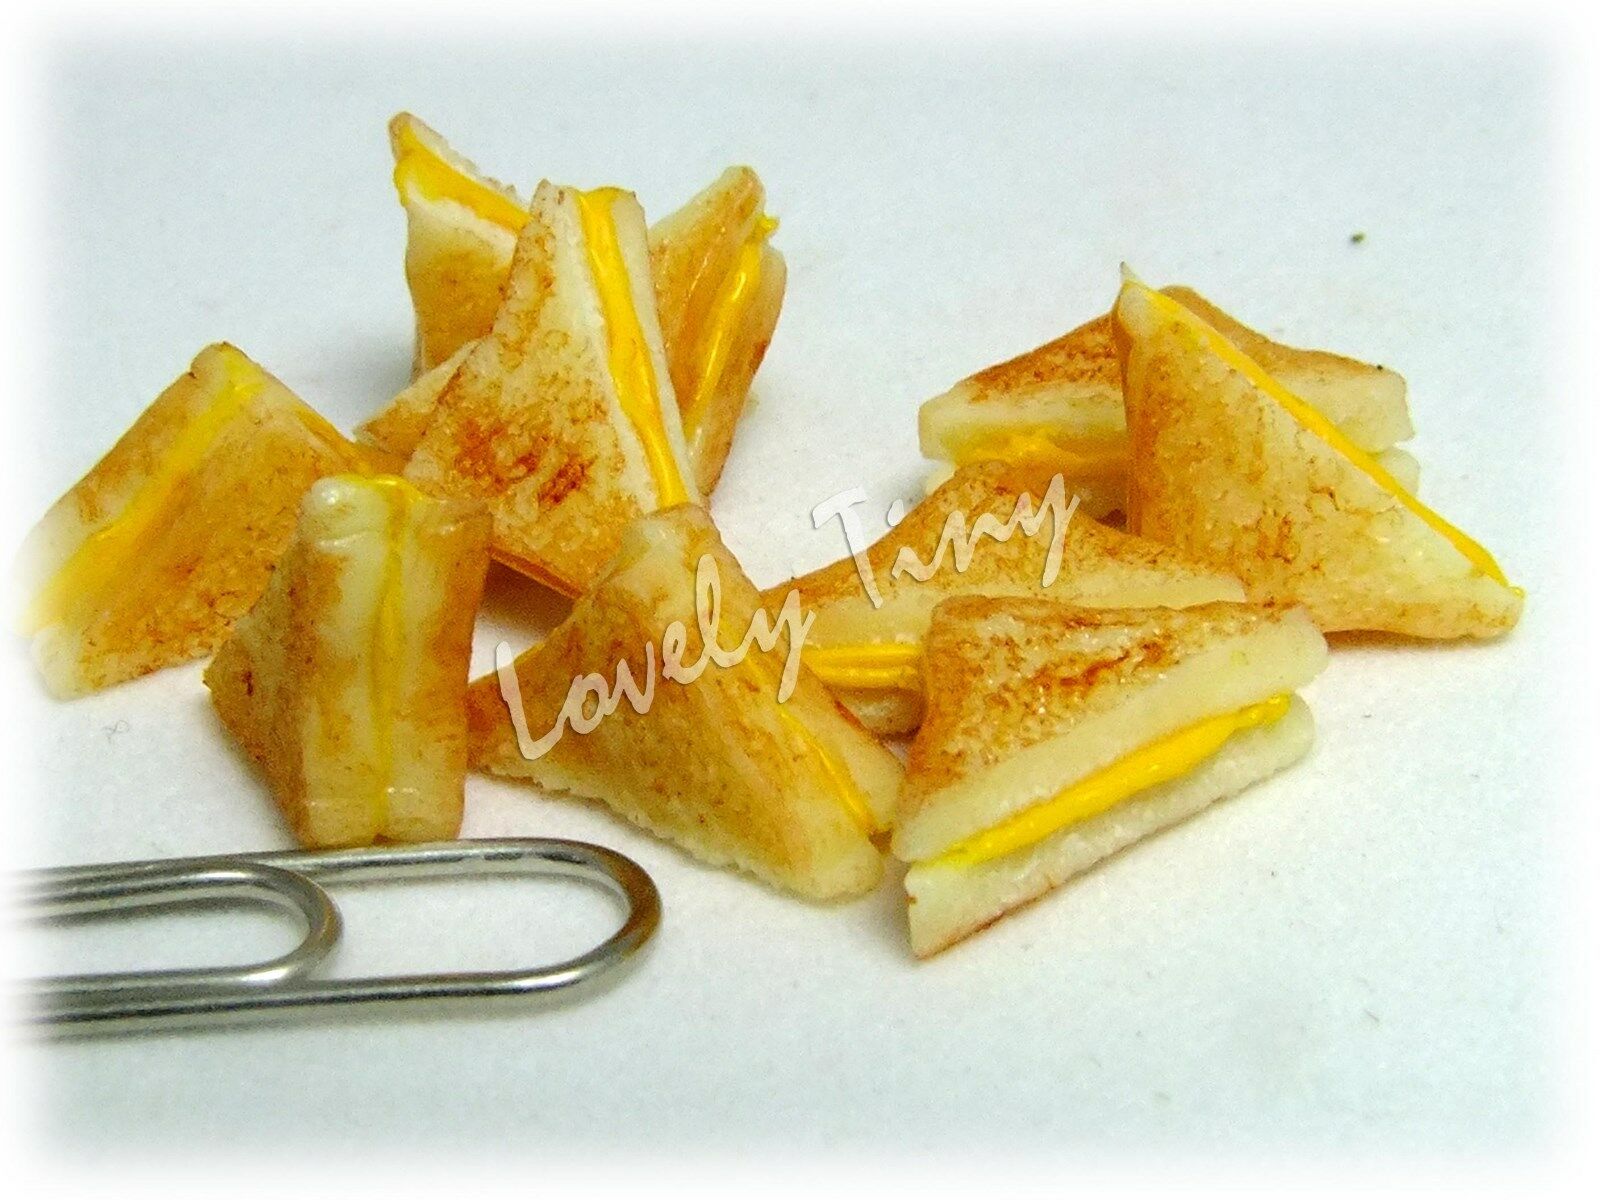 Dollhouse Miniature Bread 10 Pcs.of Grilled Cheese Sandwiches